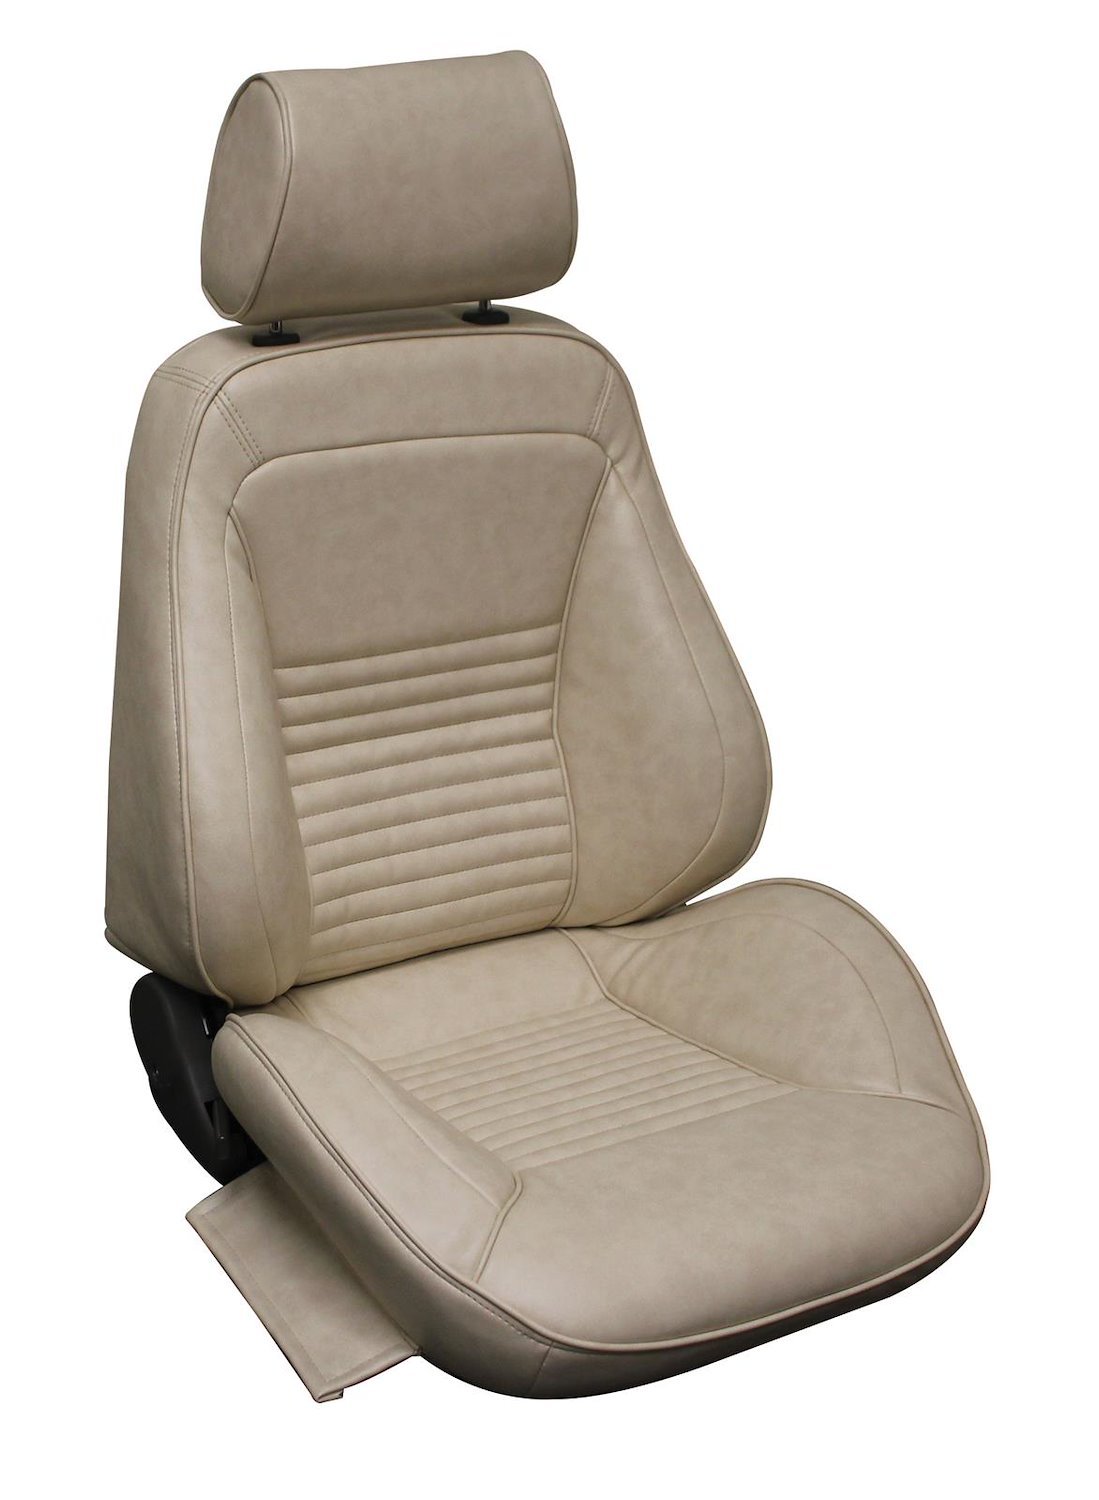 1967 Ford Mustang Standard Interior Saddle Touring II Preassembled Reclining Front Bucket Seats